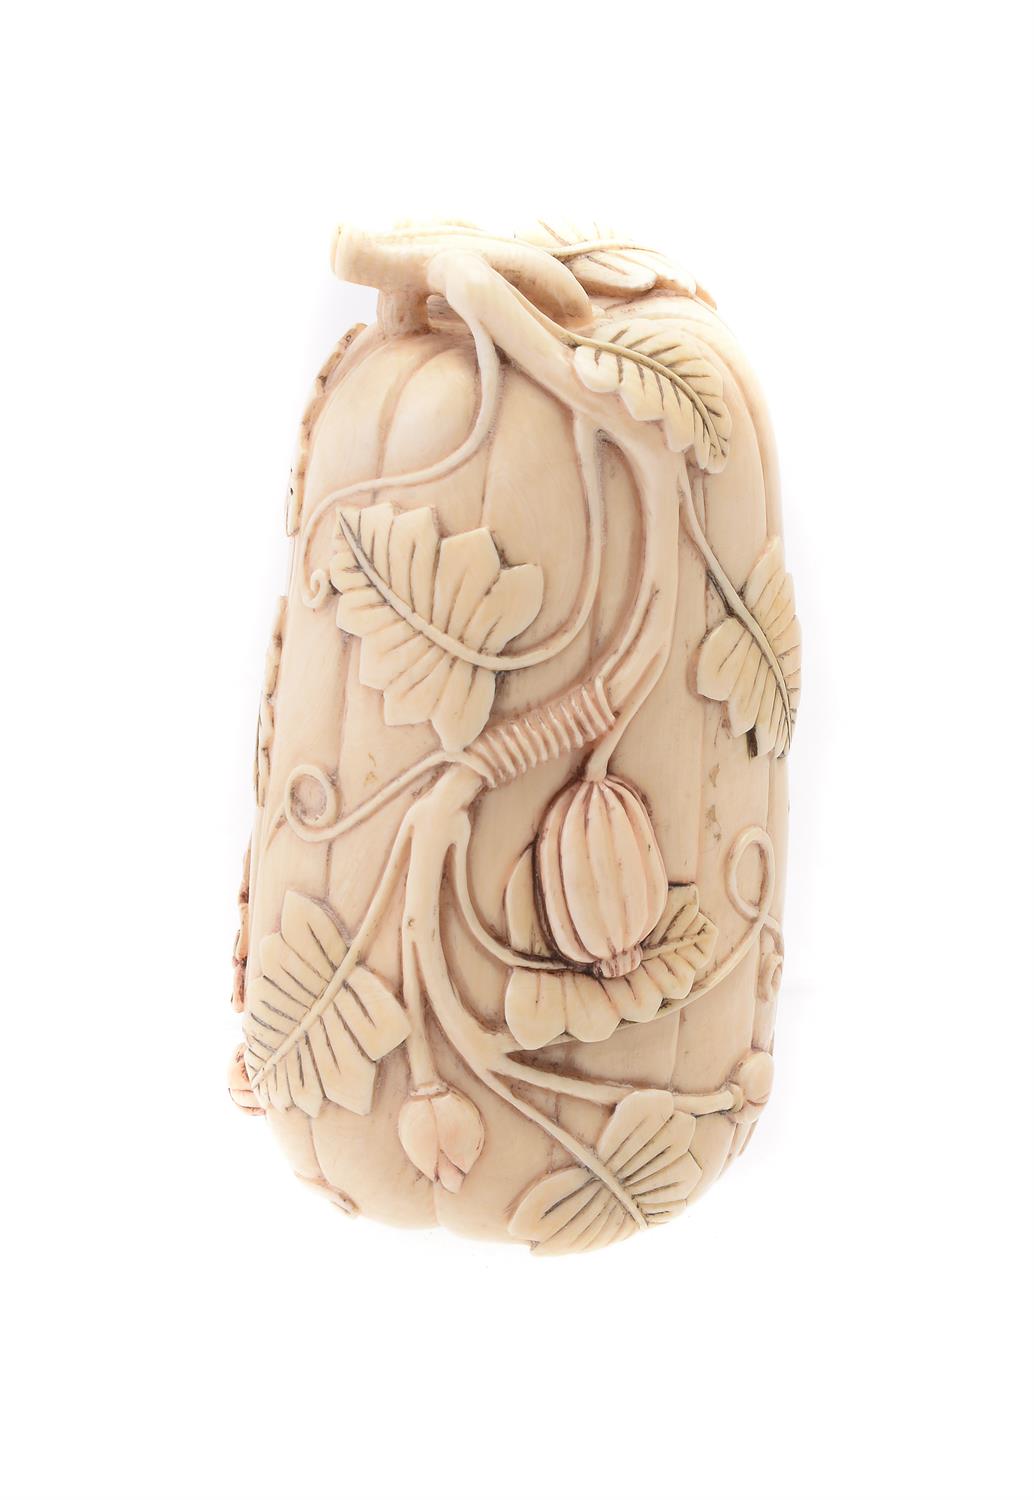 Y A Chinese ivory 'erotic' gourd carving - Image 2 of 4